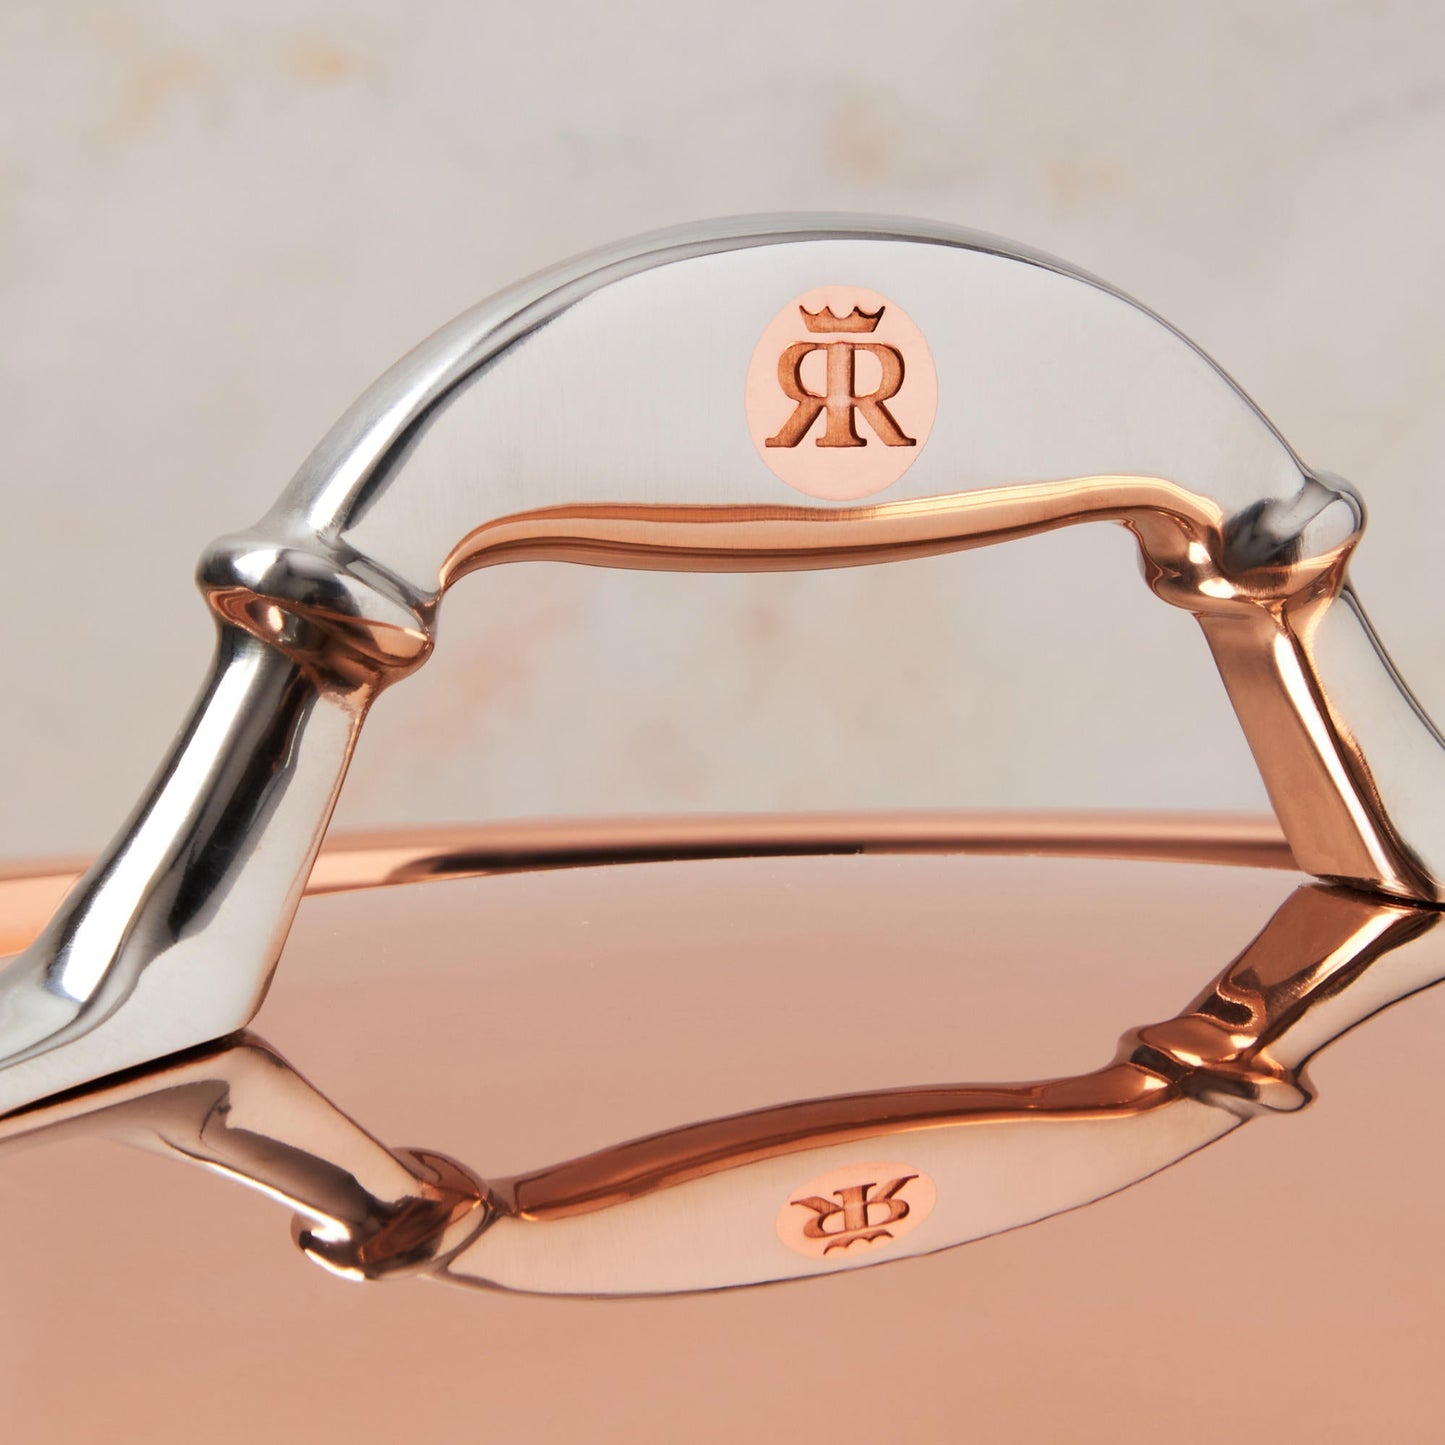 Comfortable lid handle in stainless steel with decorative inlaid copper coin by Ruffoni